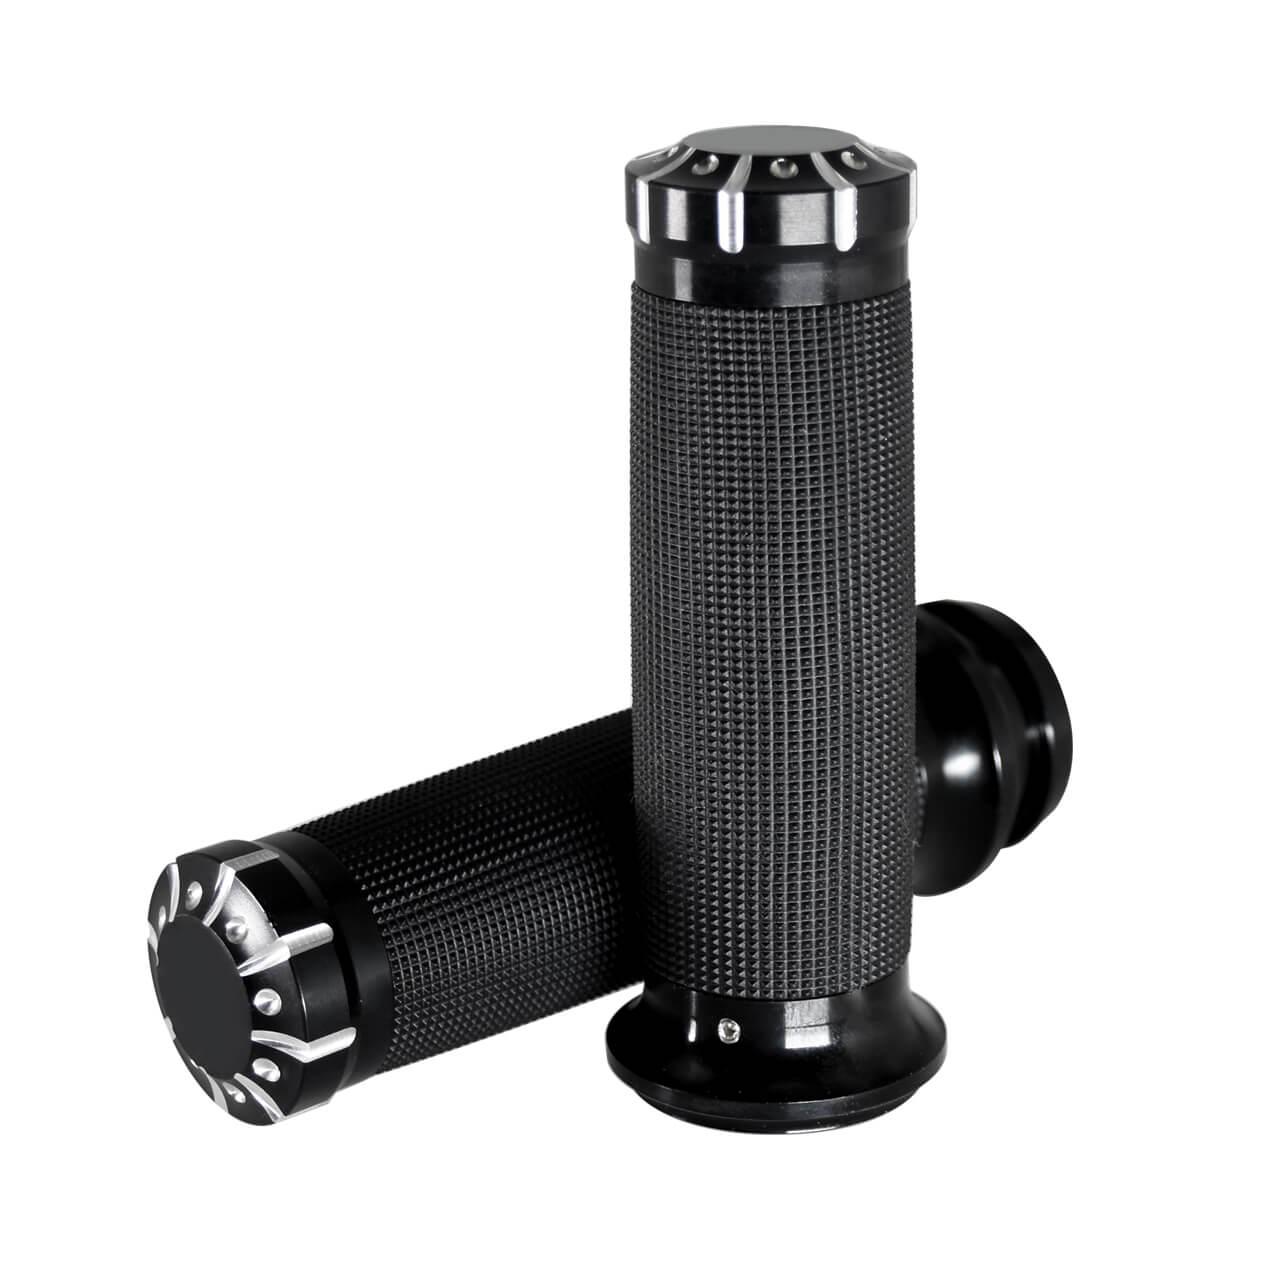 Mactions harley 1inch handlebar grips for motorcycles replacement GP004801